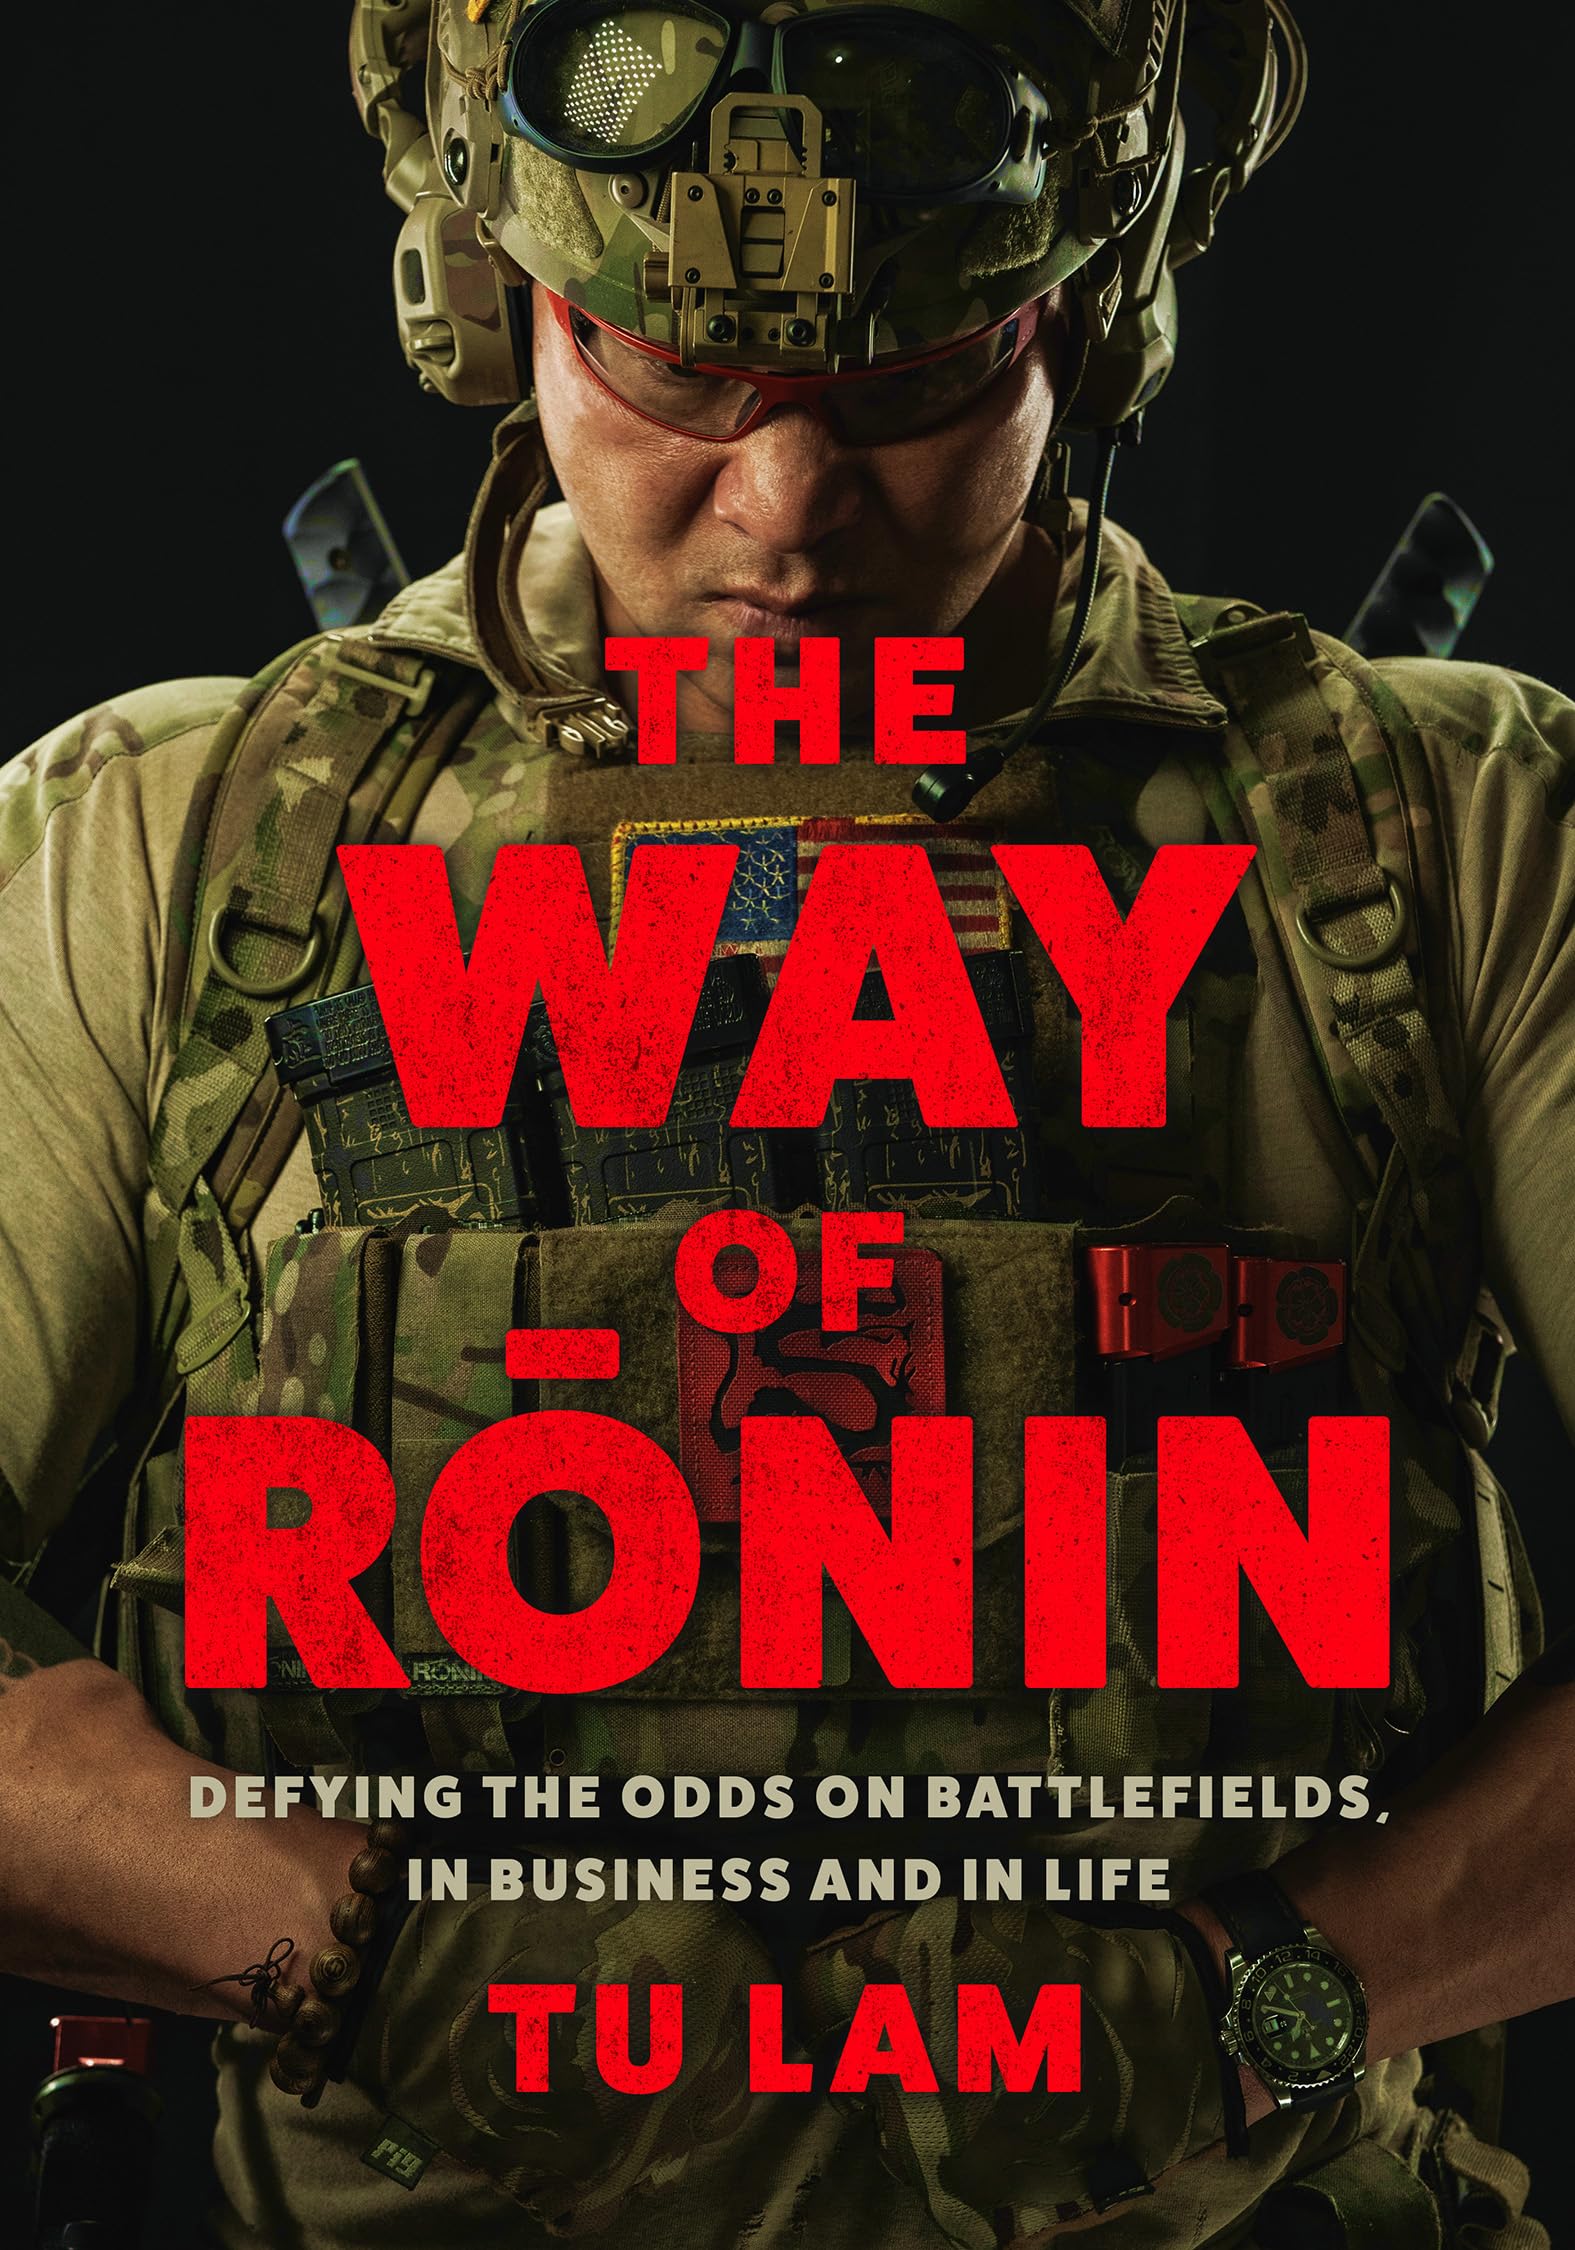 The Way of Ronin: Defying the Odds on Battlefields, in Business and in Life